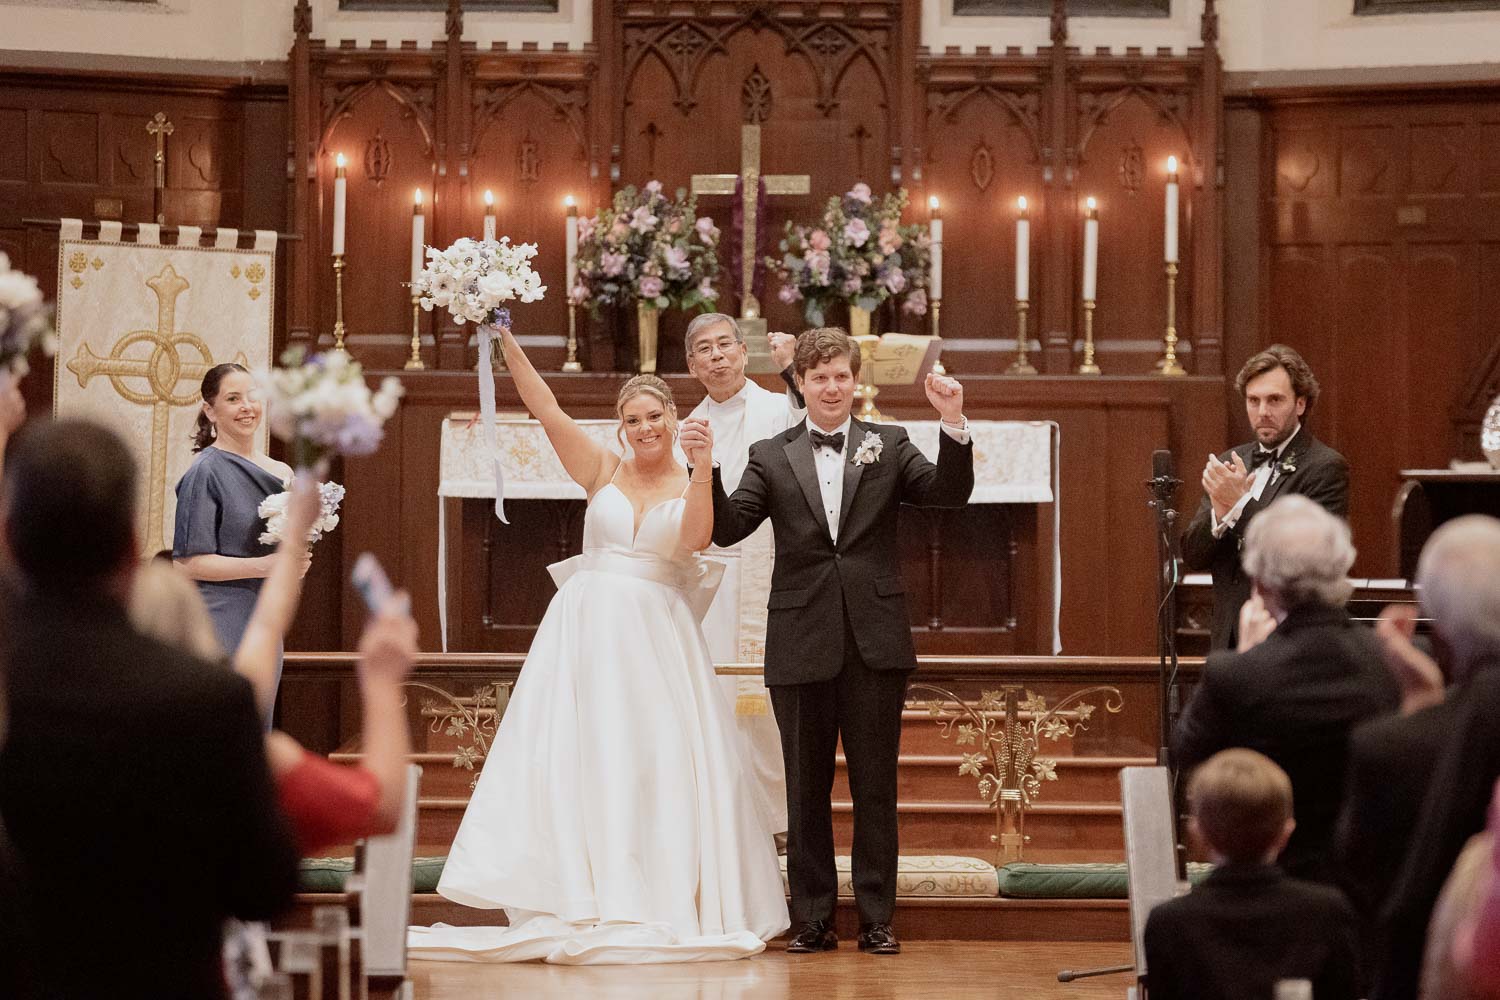 The couple rejoice at Christ Episcopal Church wedding ceremony